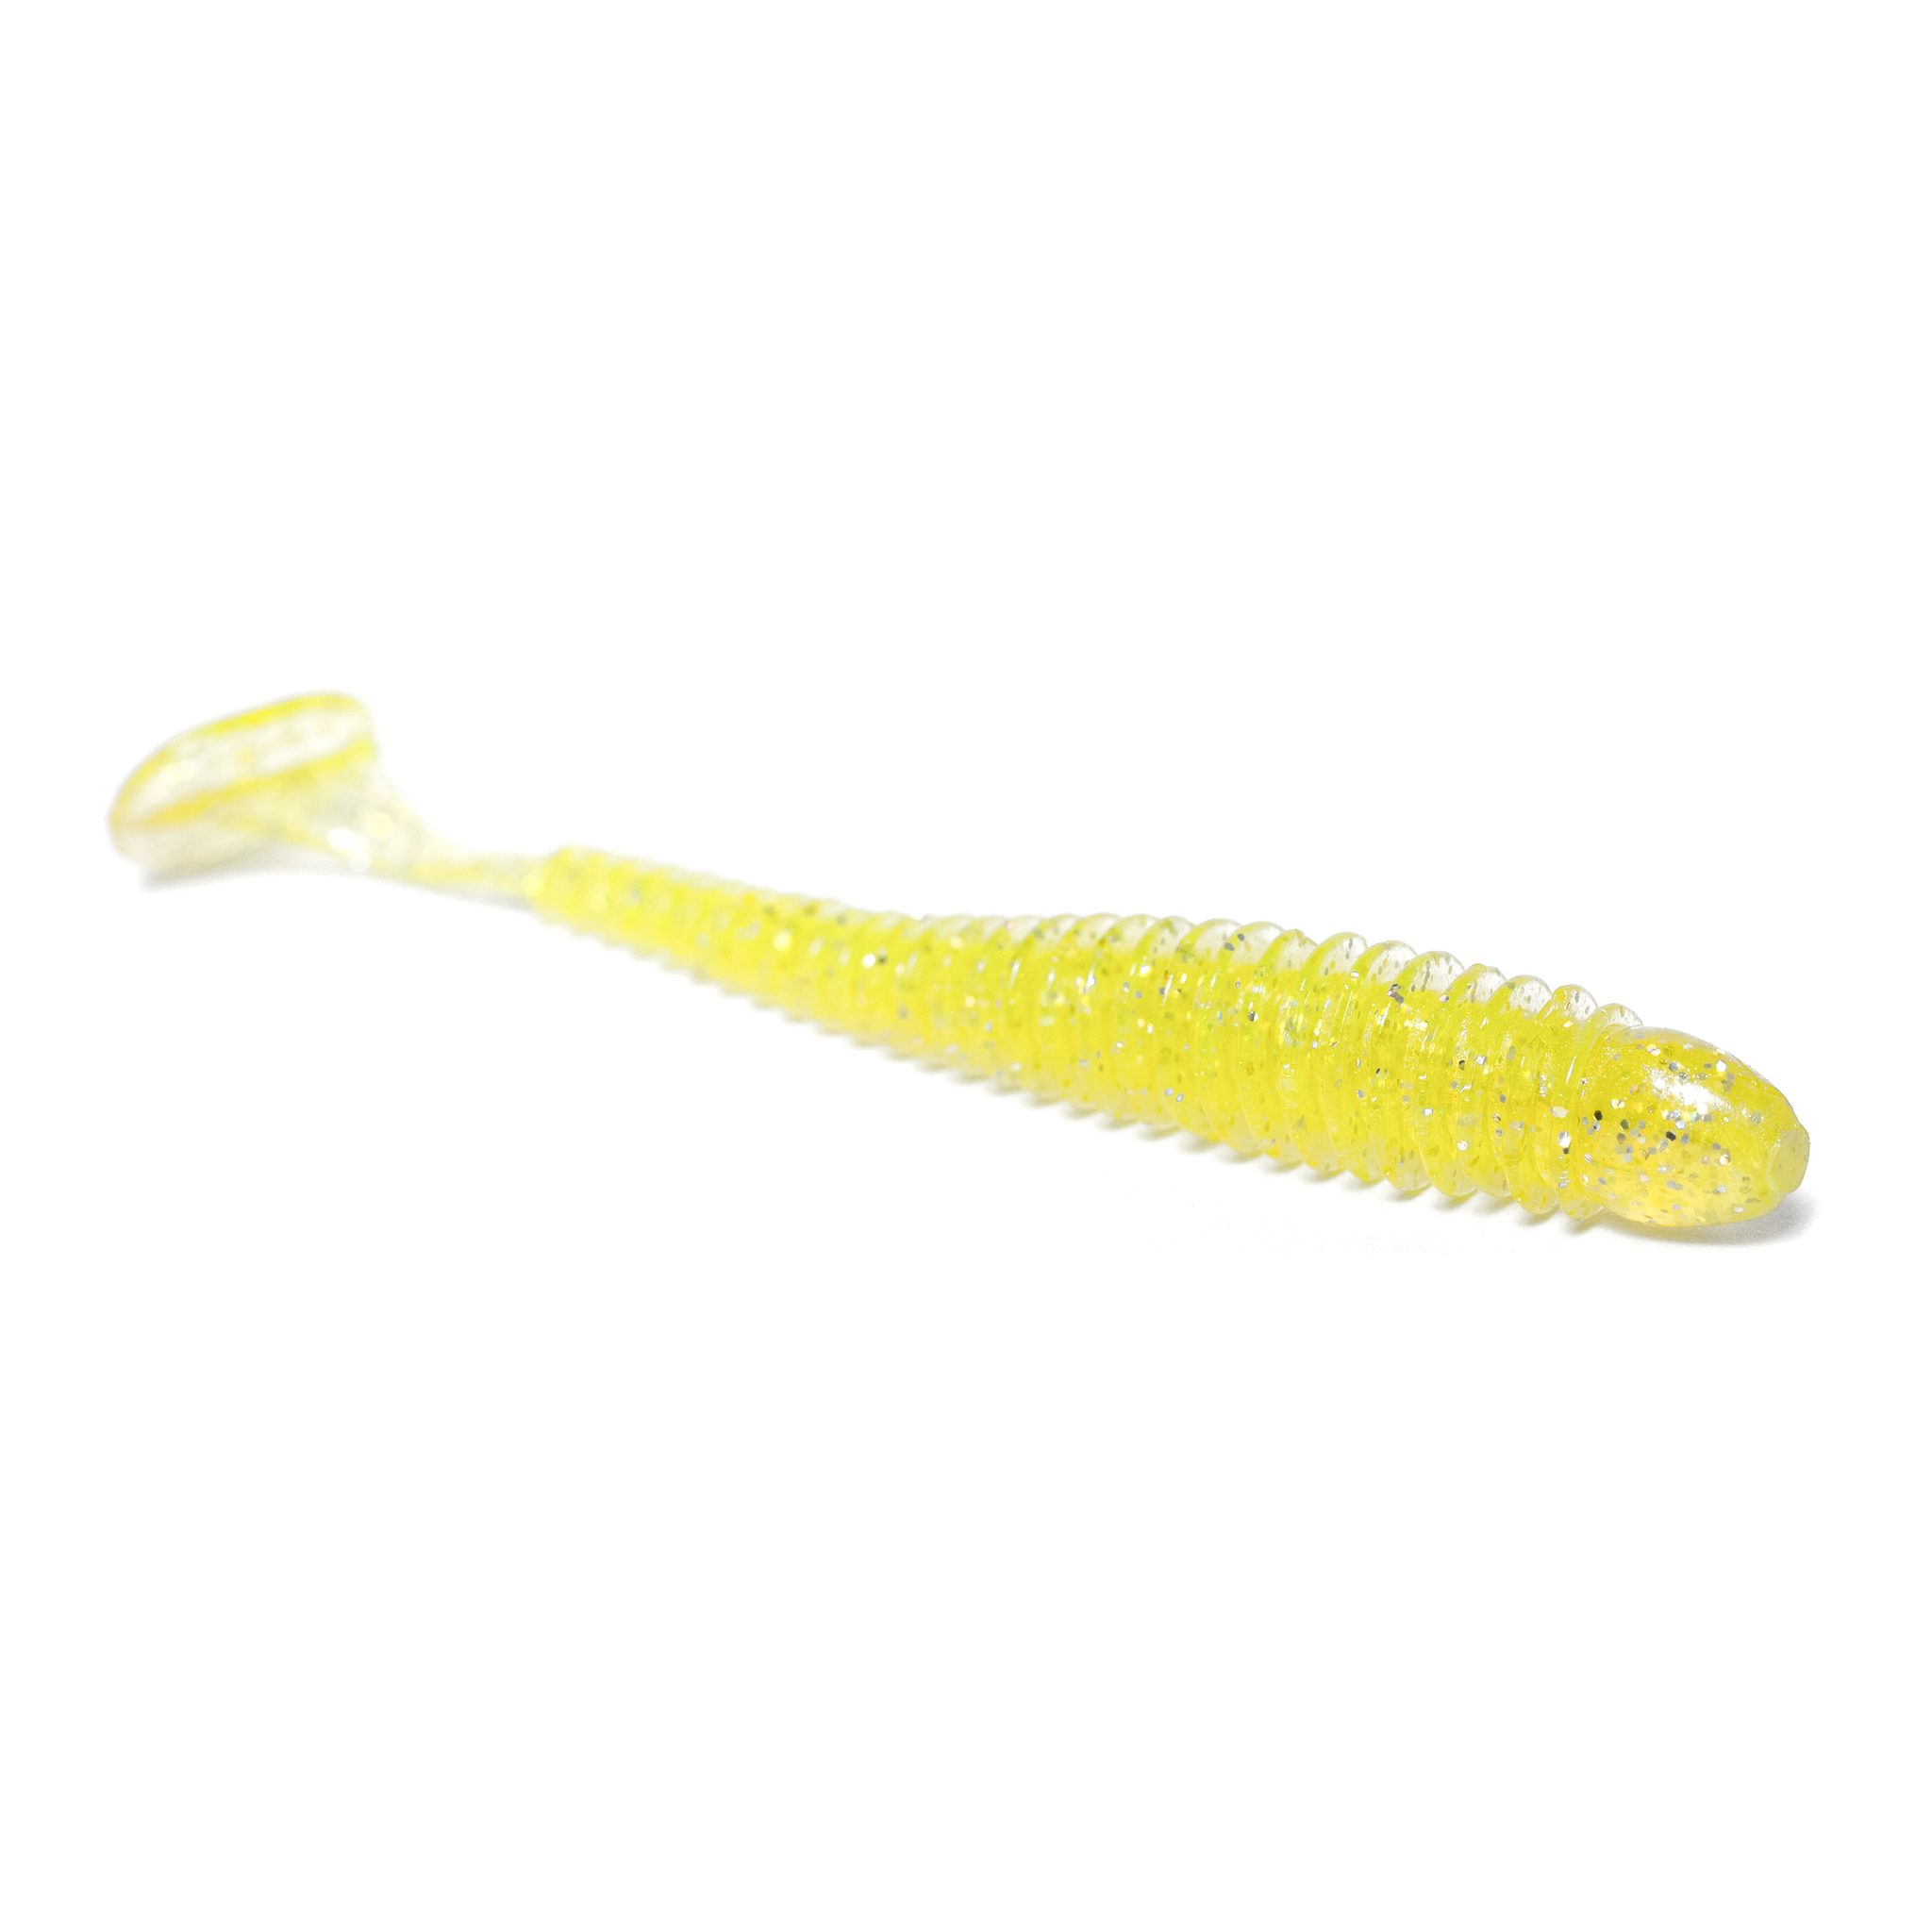 Soft Plastics Mold for 3.8 inch Swimbait paddle tail soft lure - 1 Cavity  Mold. Bugmolds USA offers a high quality stone mold for soft plastics  fishing baits. This mold is a